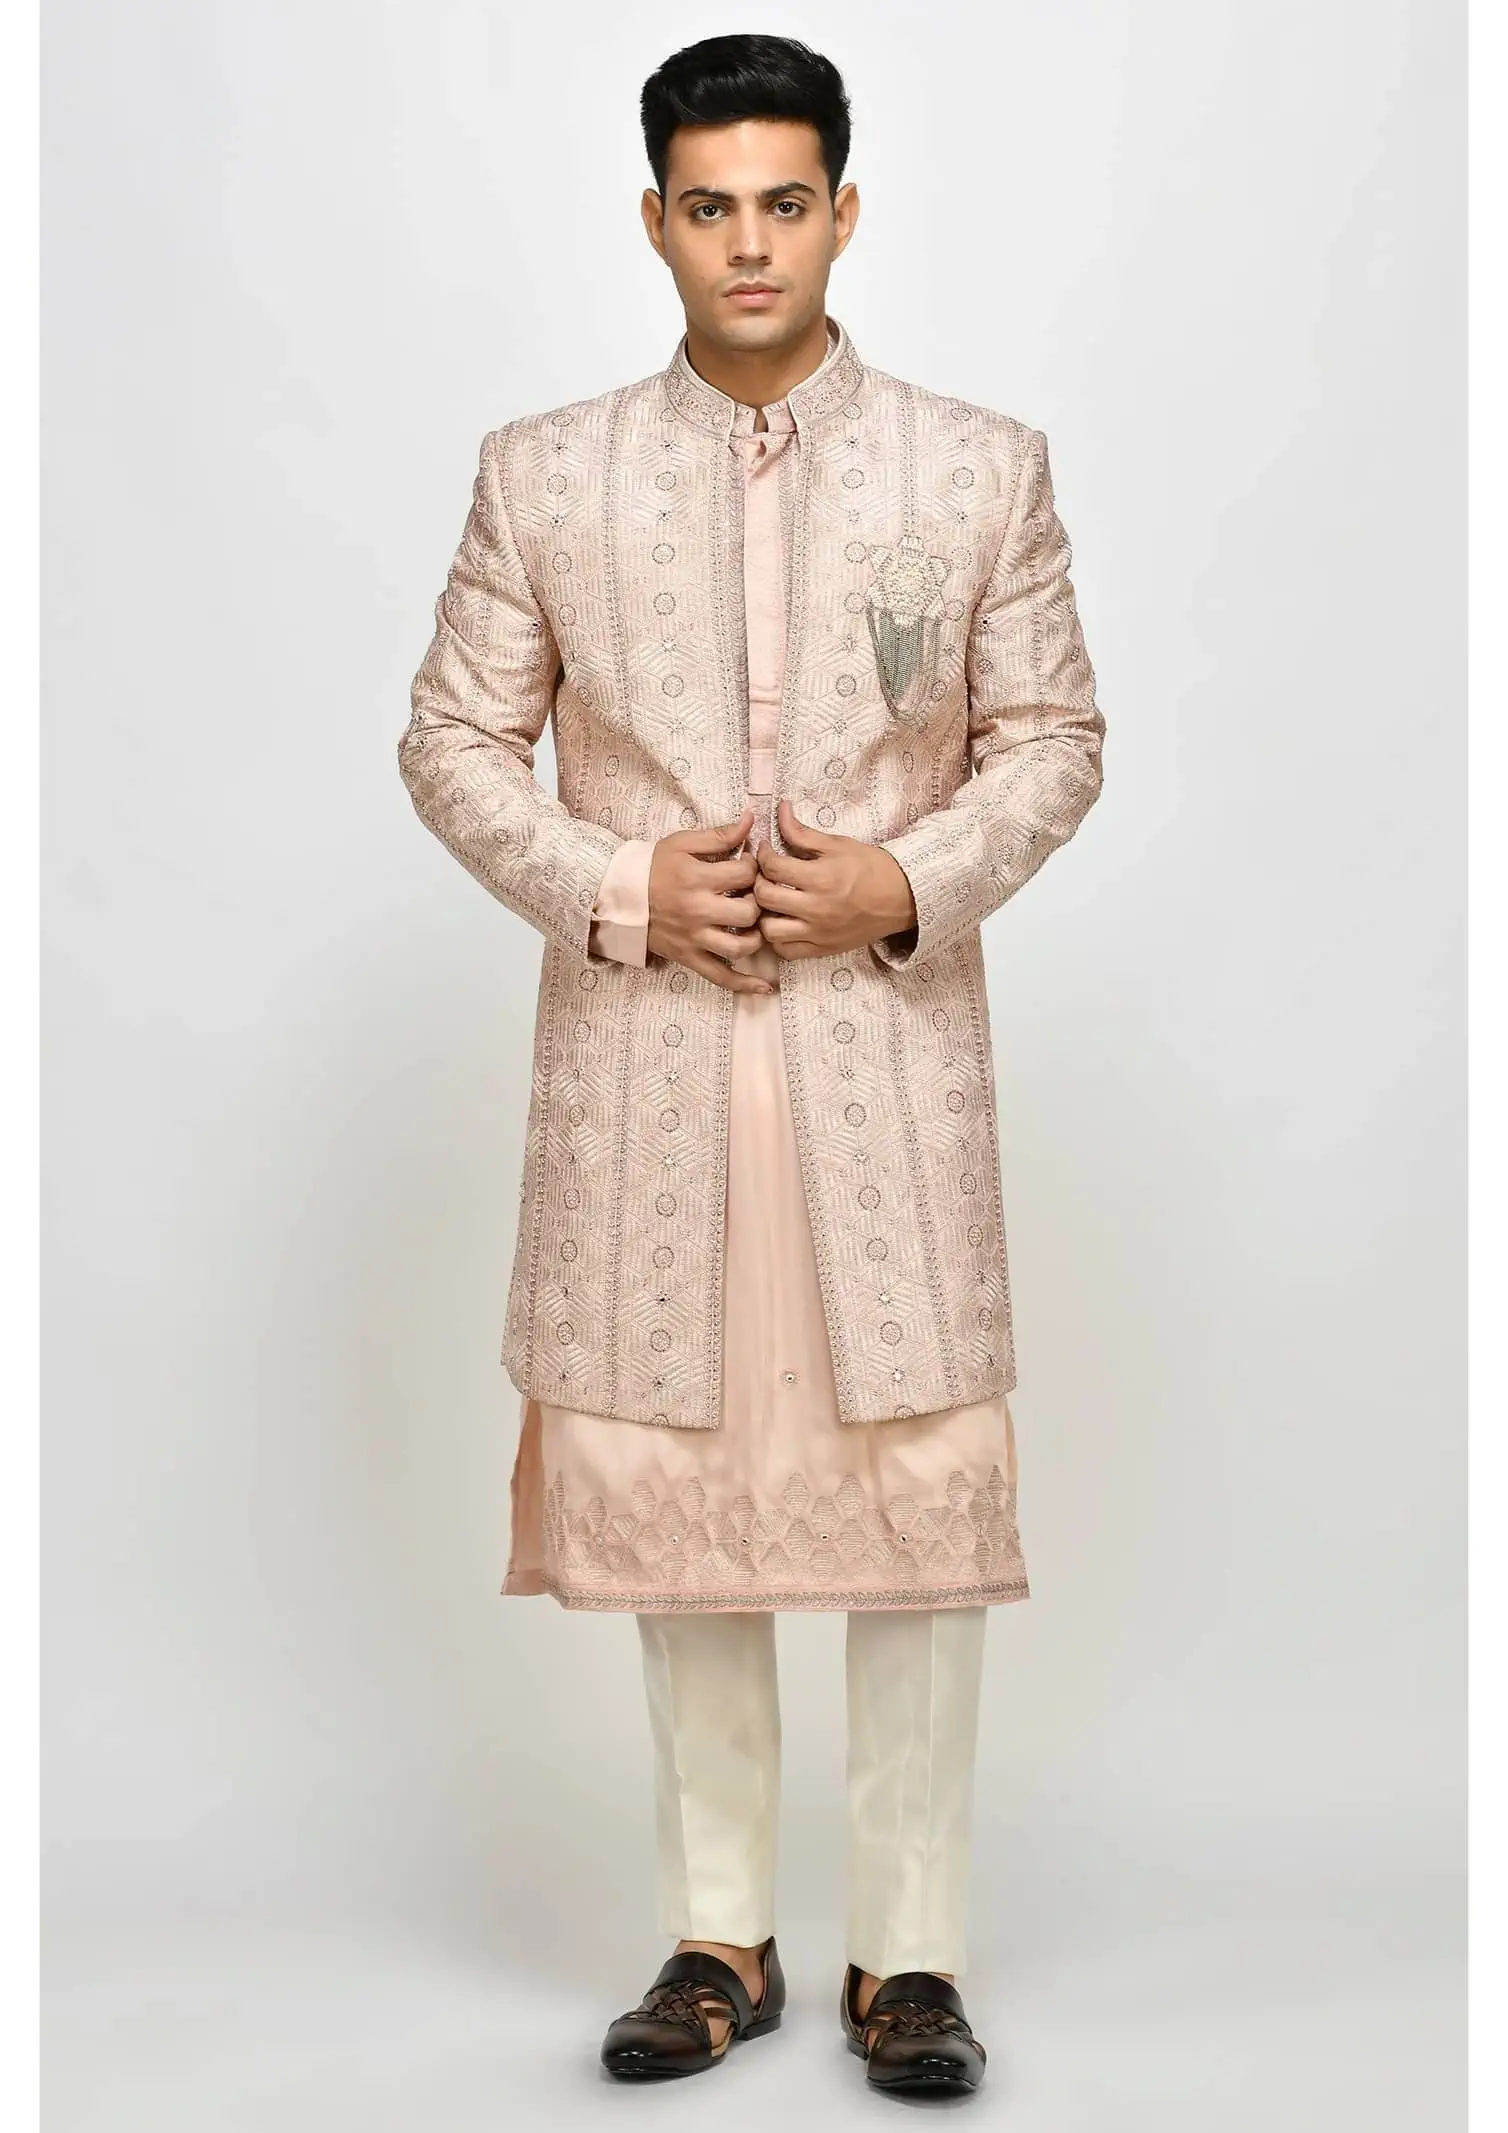 Front Open style Achkan in Blush Pink